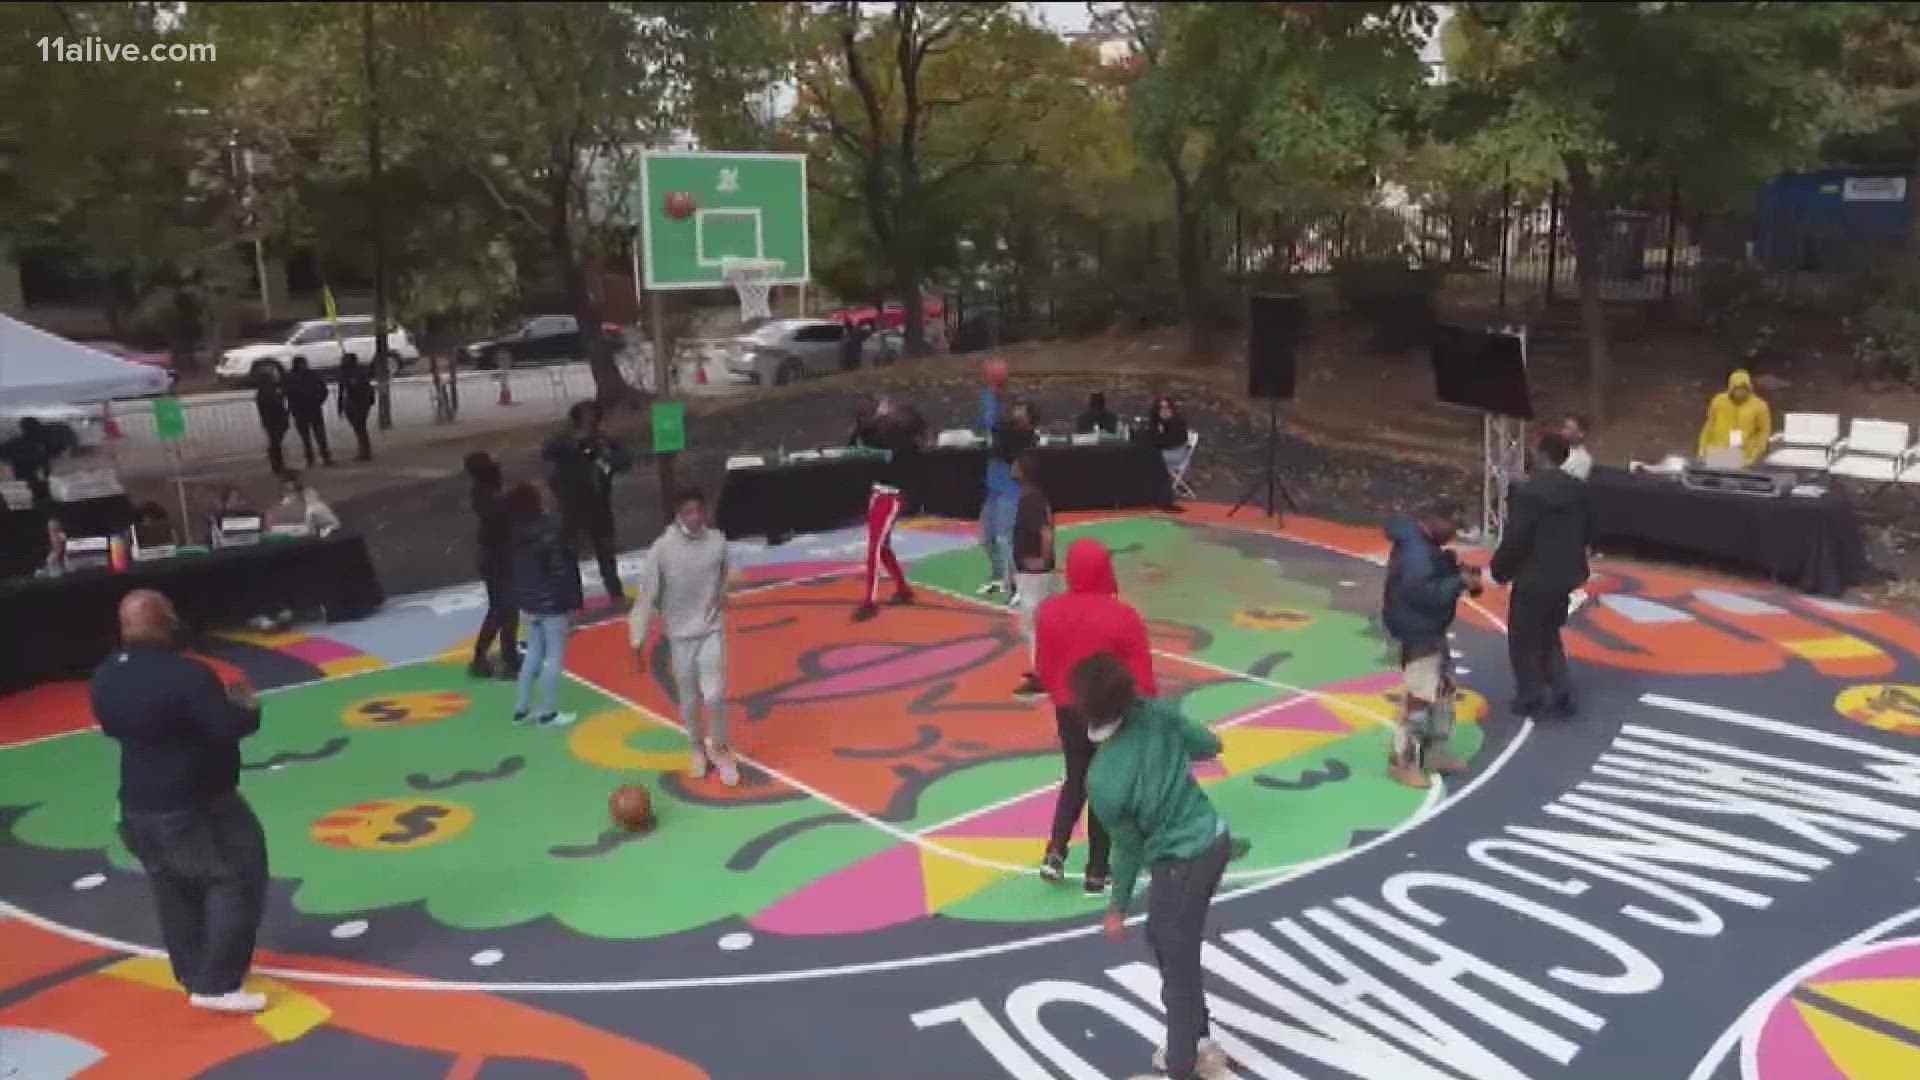 21 Savage partnered to help refurbish a basketball court in the heart of Old Fourth Ward. High school students from two different schools attended the unveiling.